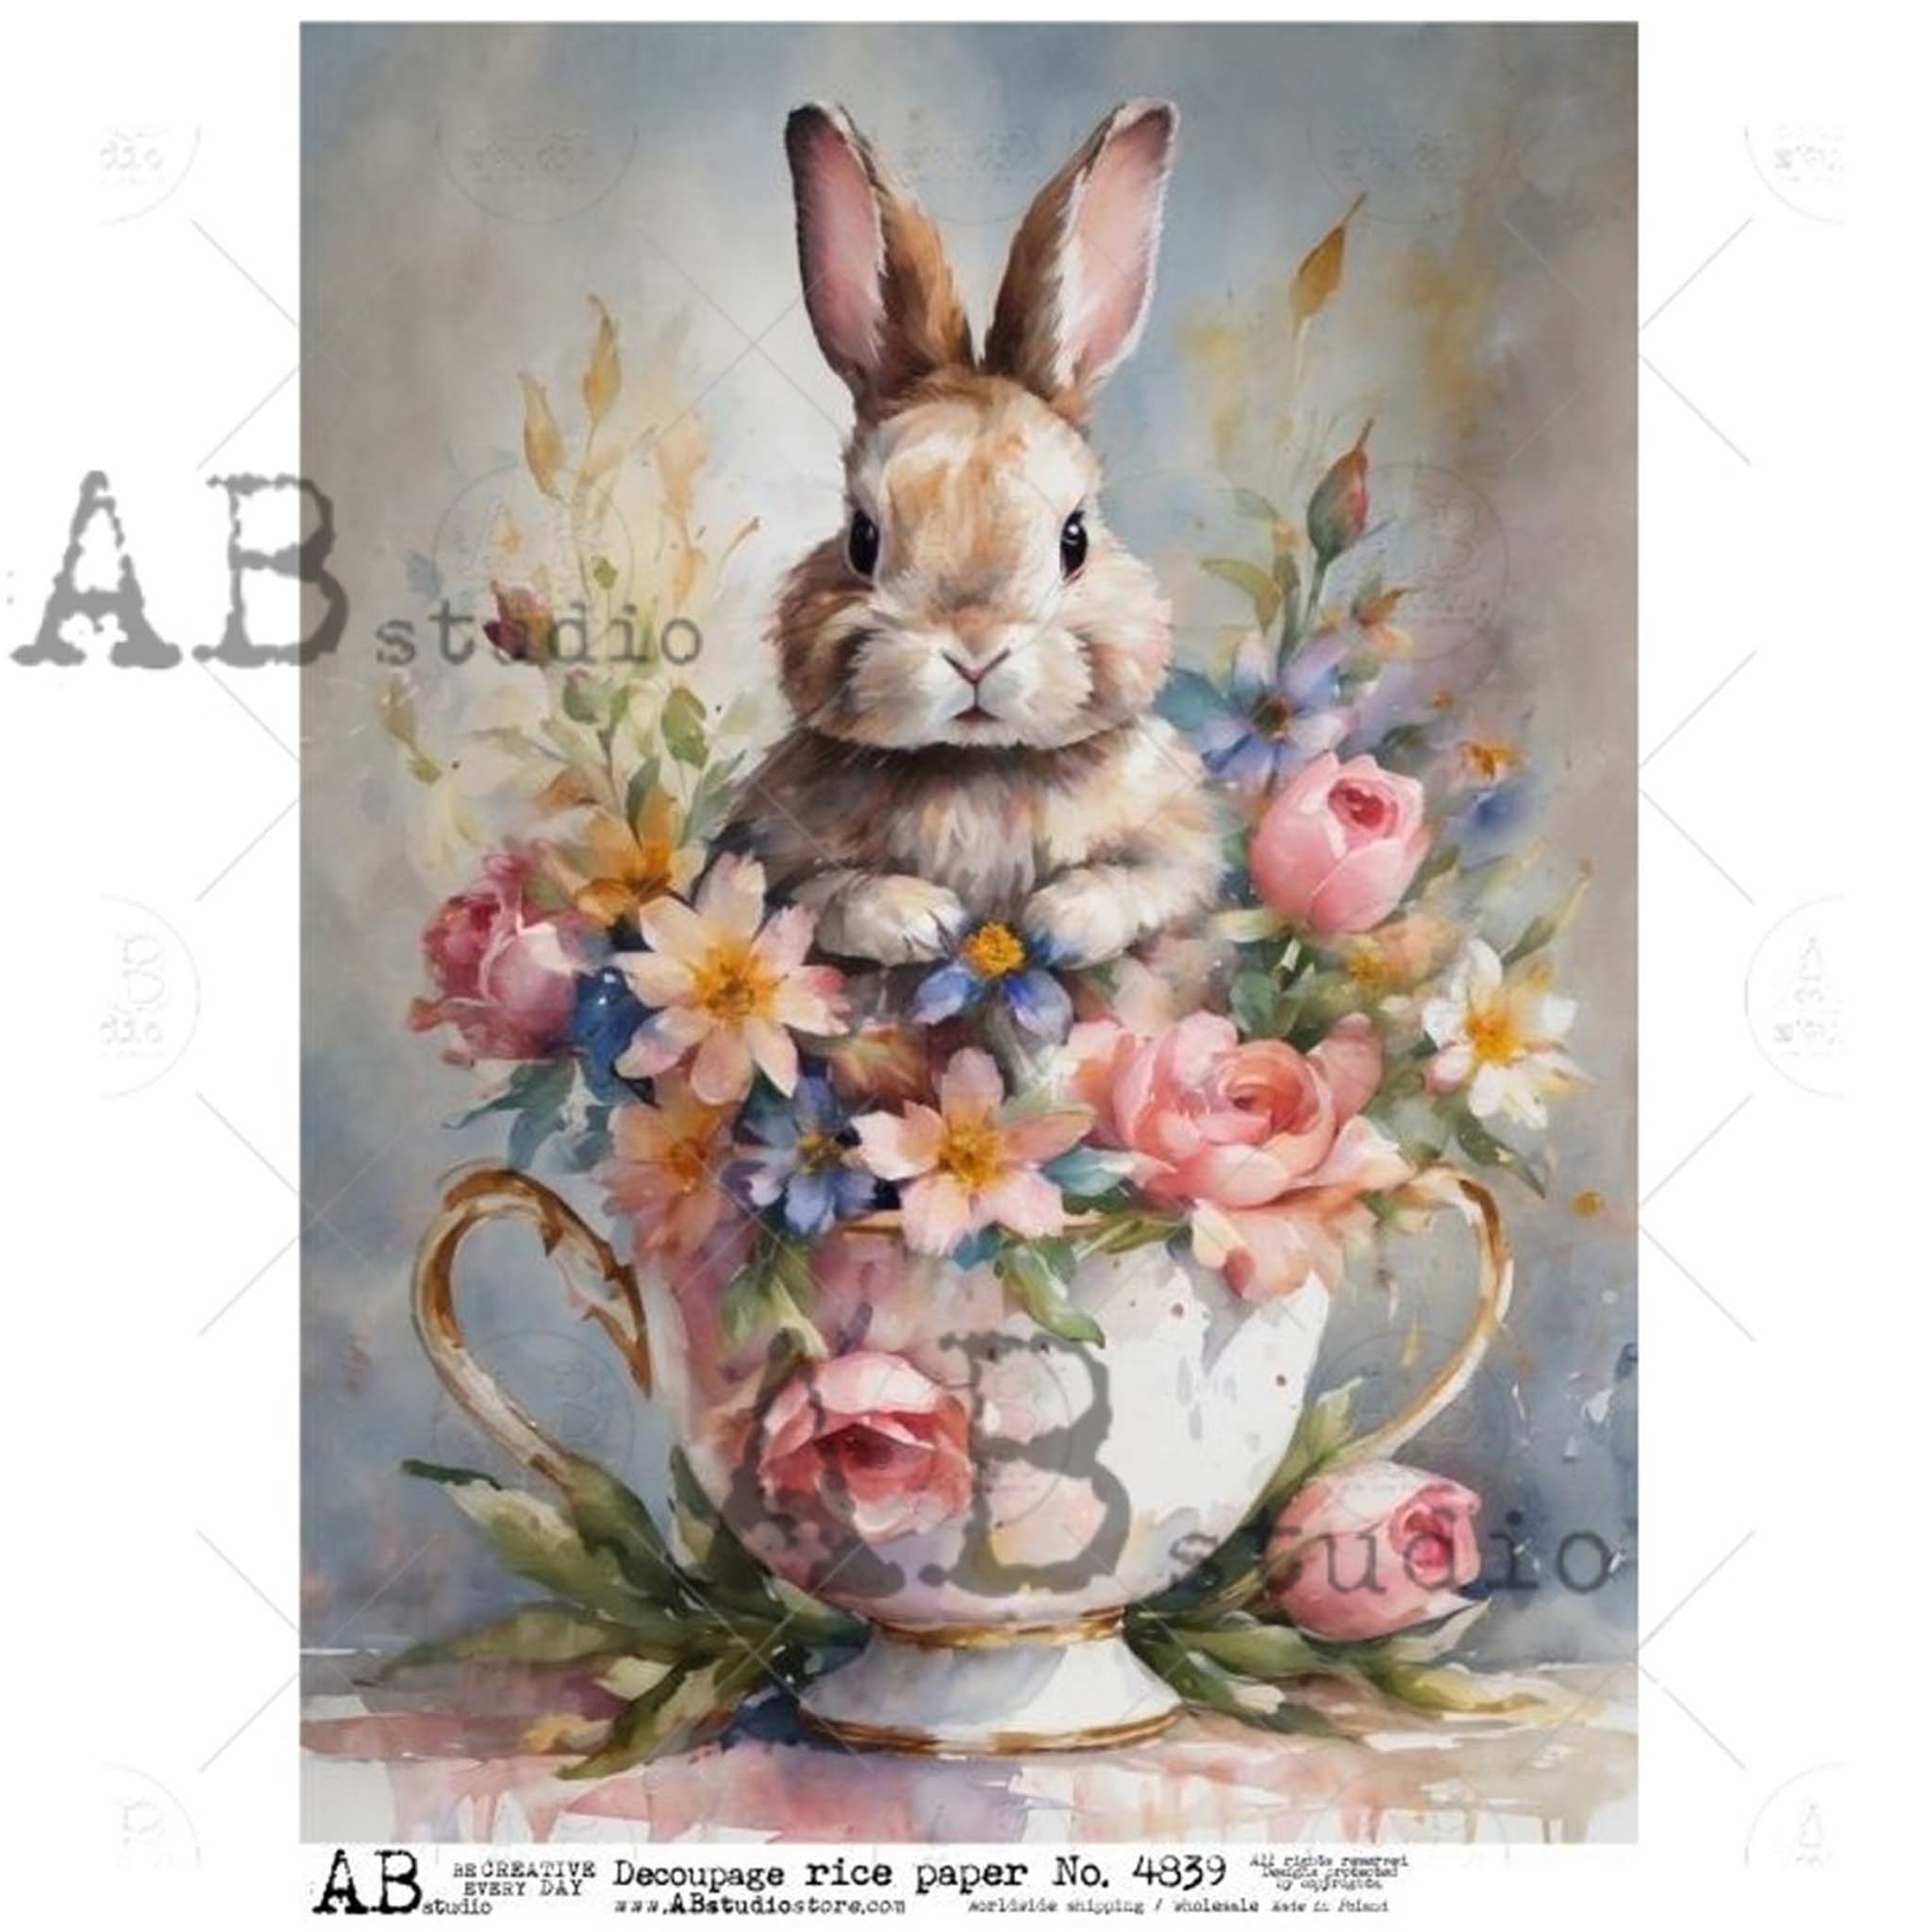 A4 rice paper design featuring a sweet bunny in a teacup surrounded by a bouquet of flowers. White borders on the sides.